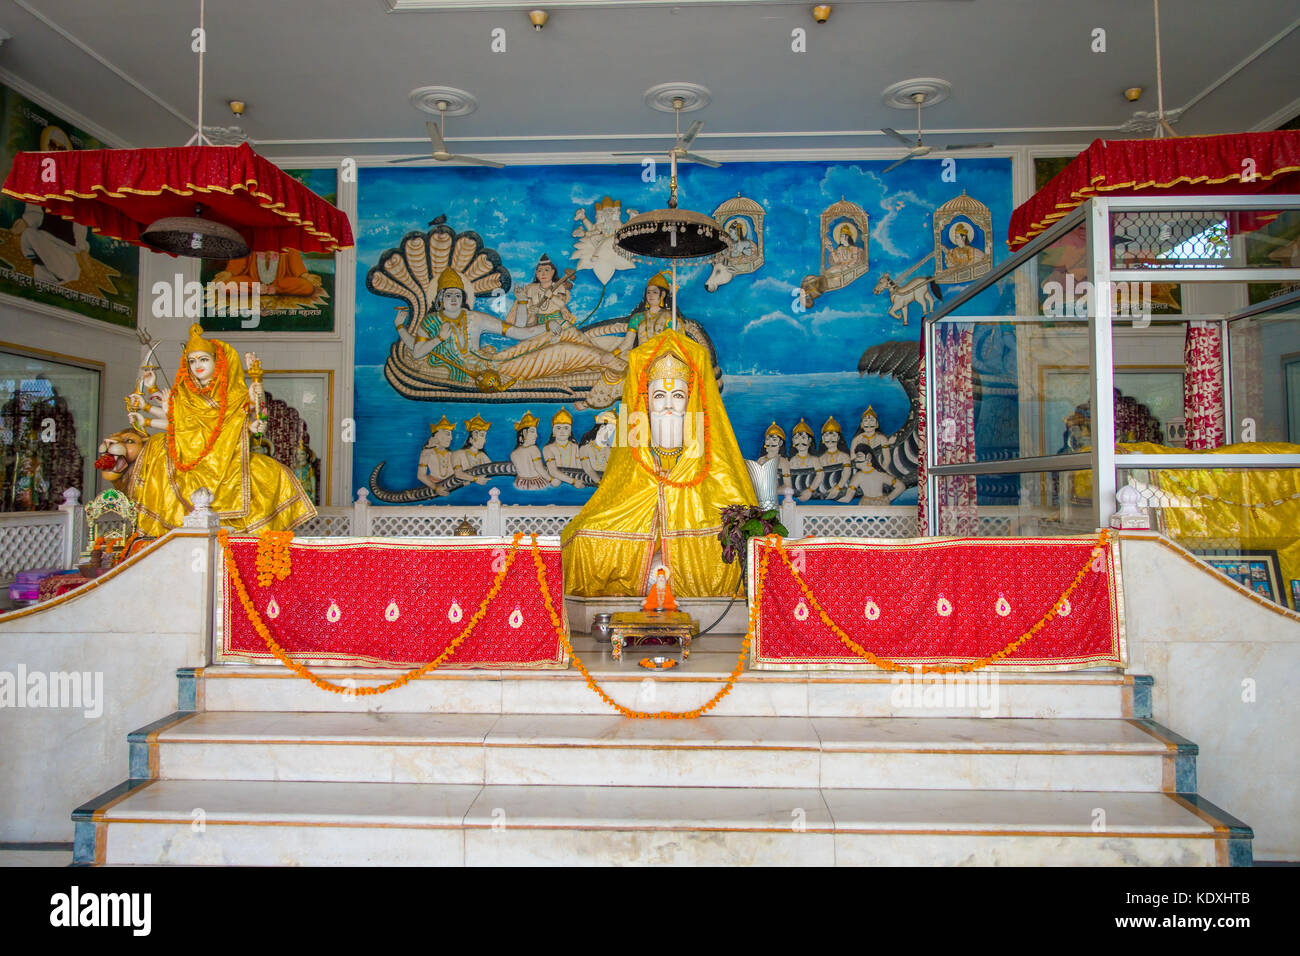 JAIPUR, INDIA - SEPTEMBER 19, 2017: Indoor view of a temple Goddess Kali Ma and God Bhairav Murti in Jaipur local Temple. Statues of Hindu Gods and Goddess in Rajasthan Stock Photo